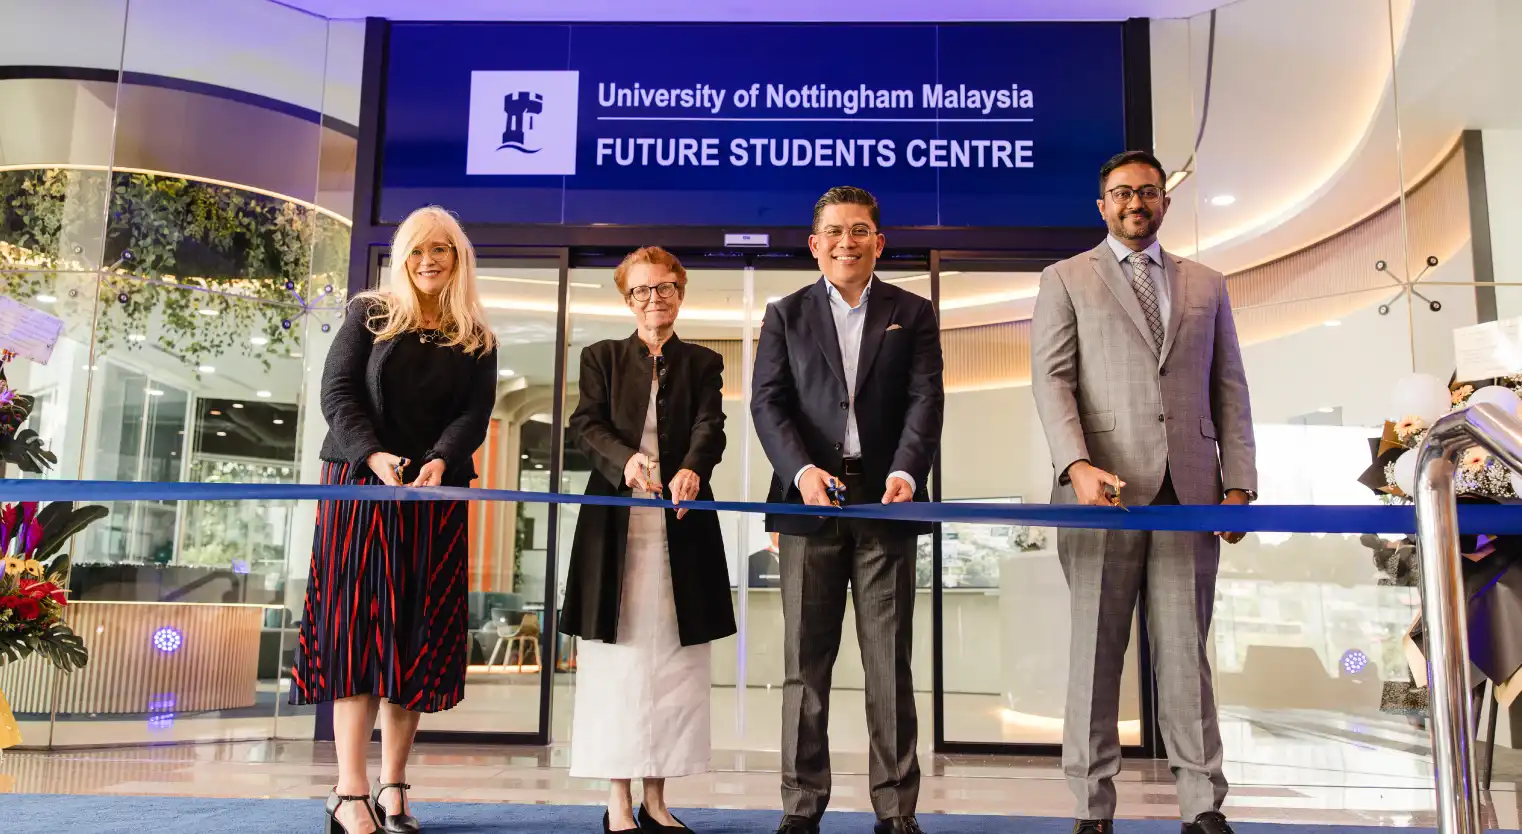 unm-launches-future-students-centre-in-central-petaling-jaya